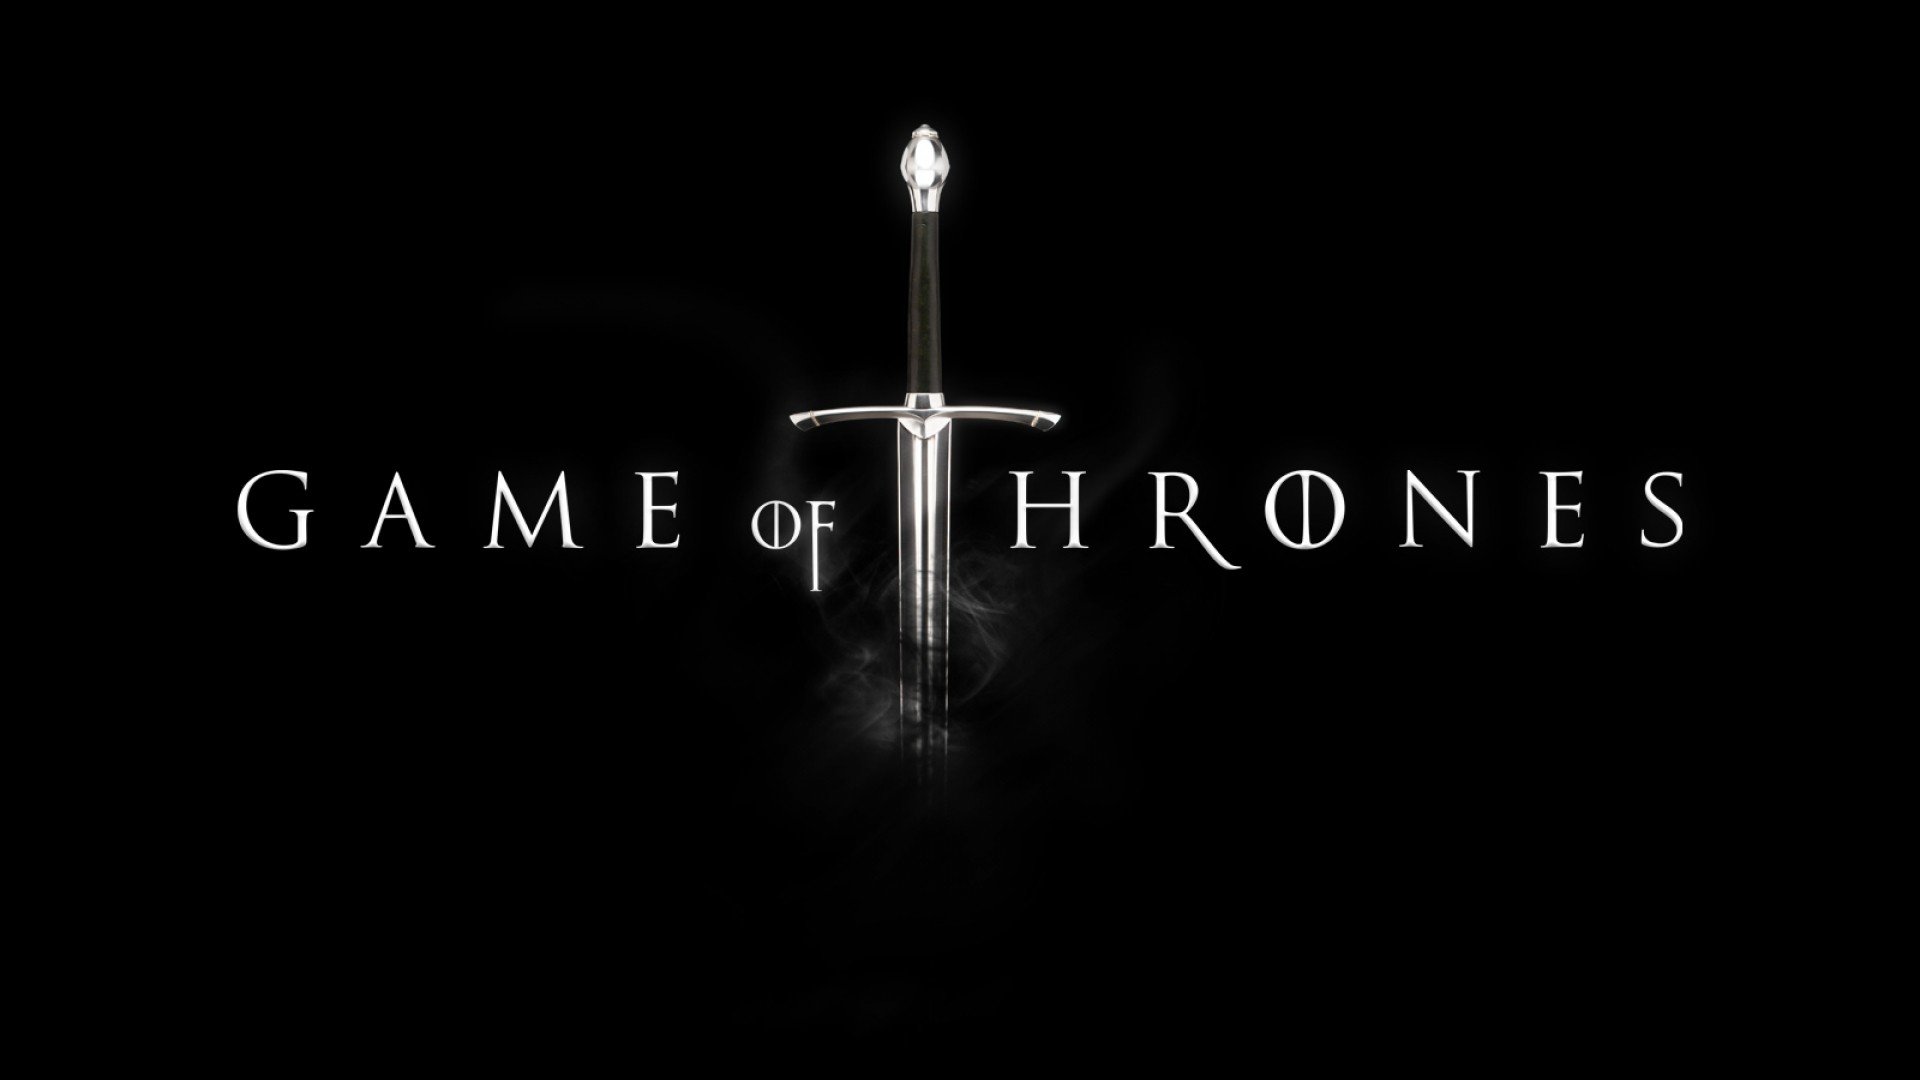 game of thrones exclusive hd wallpapers game of thrones wallpaper 1920x1080